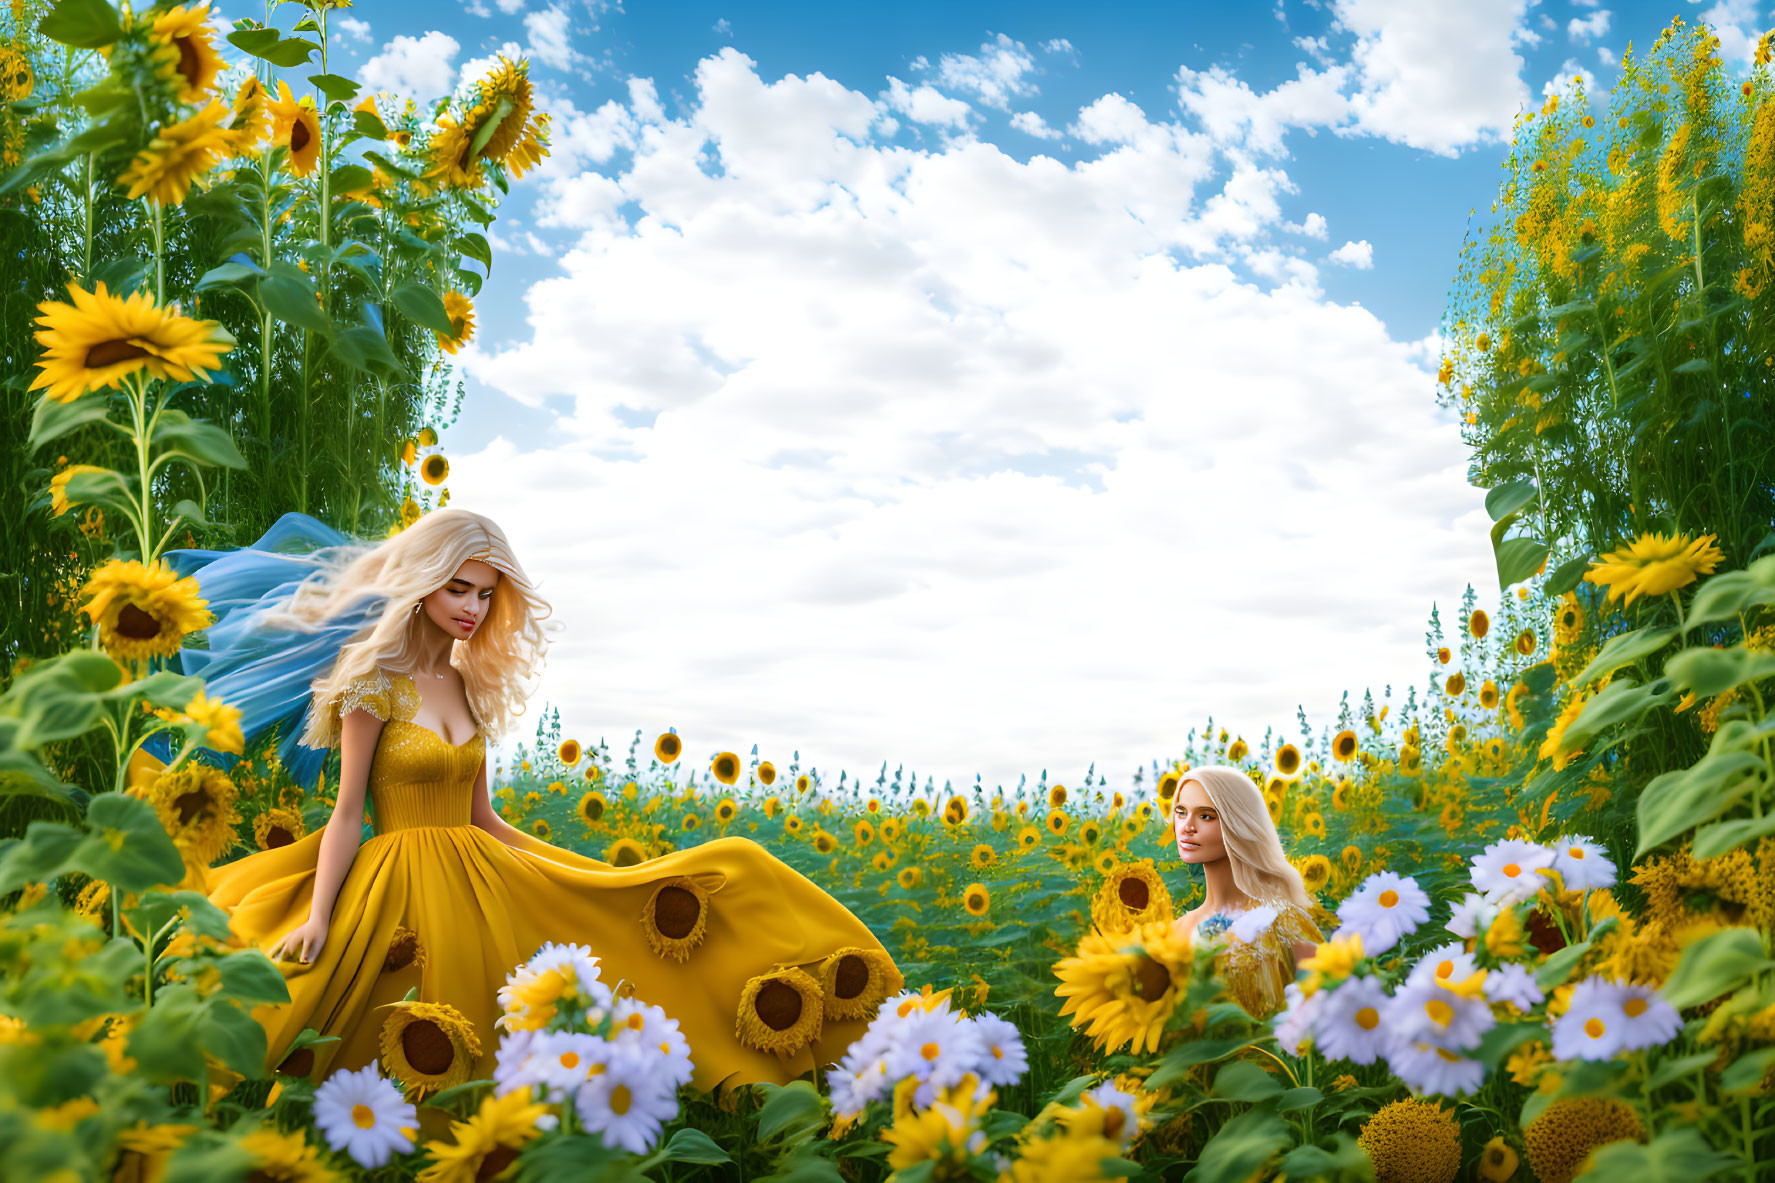 Women in Yellow Dresses Surrounded by Sunflowers Under Blue Sky